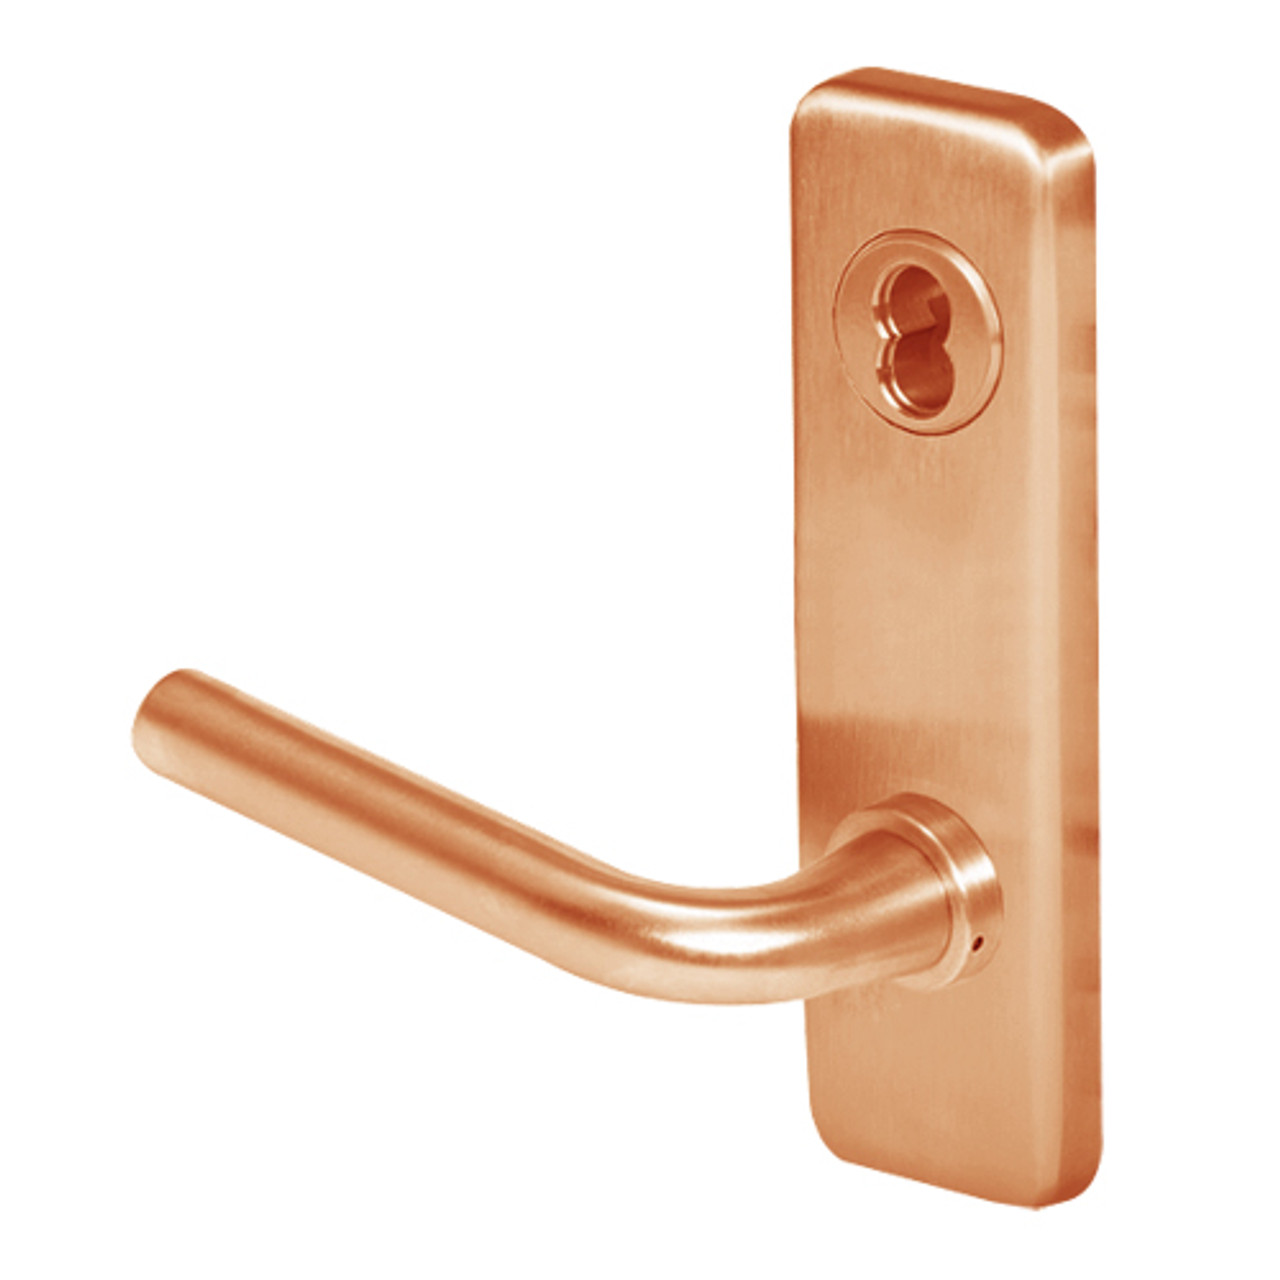 45H0L12J611 Best 40H Series Privacy with Deadbolt Heavy Duty Mortise Lever Lock with Solid Tube with No Return in Bright Bronze